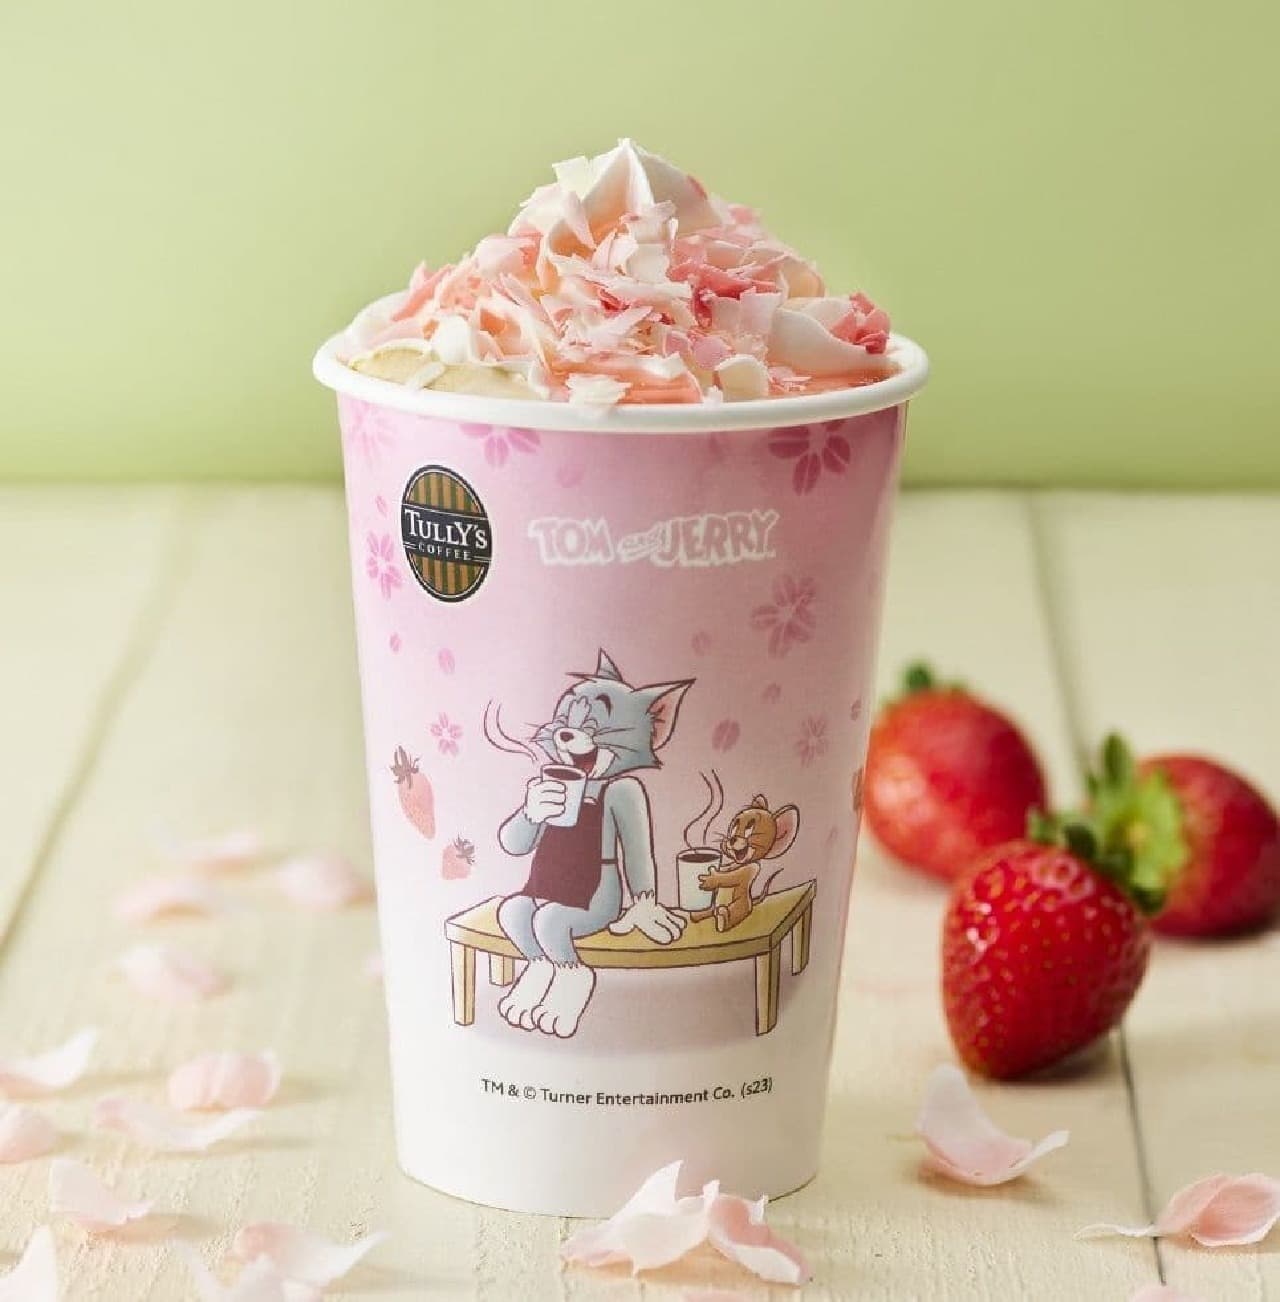 Tully's Coffee "Tom & Jerry: Cherry Blossom Dancing Strawberry White Chocolat Latte".